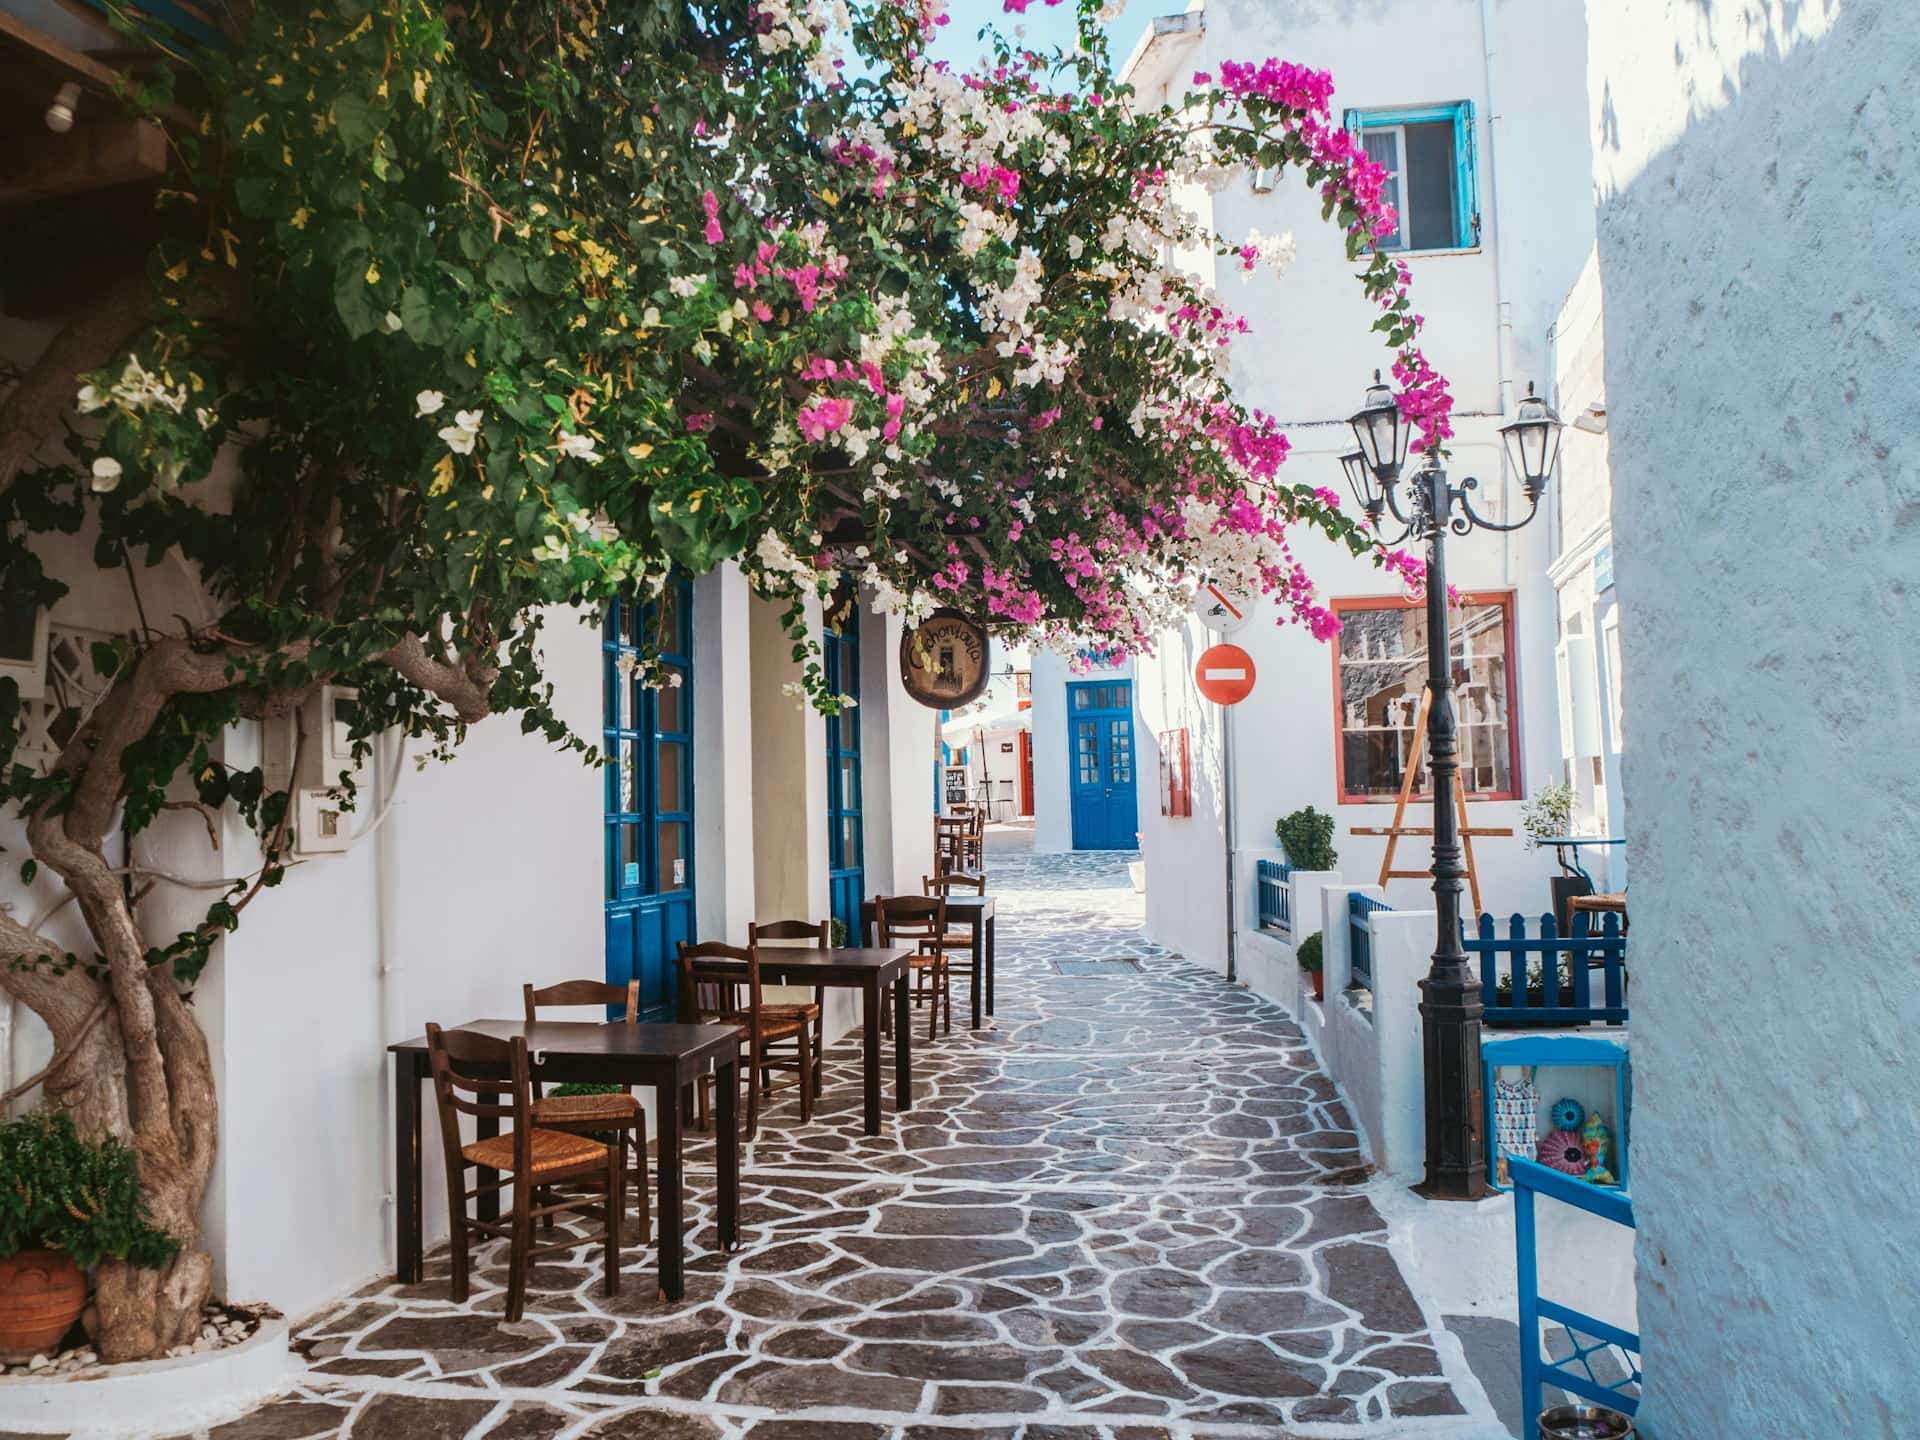 Accommodation in Milos: The best places for couples